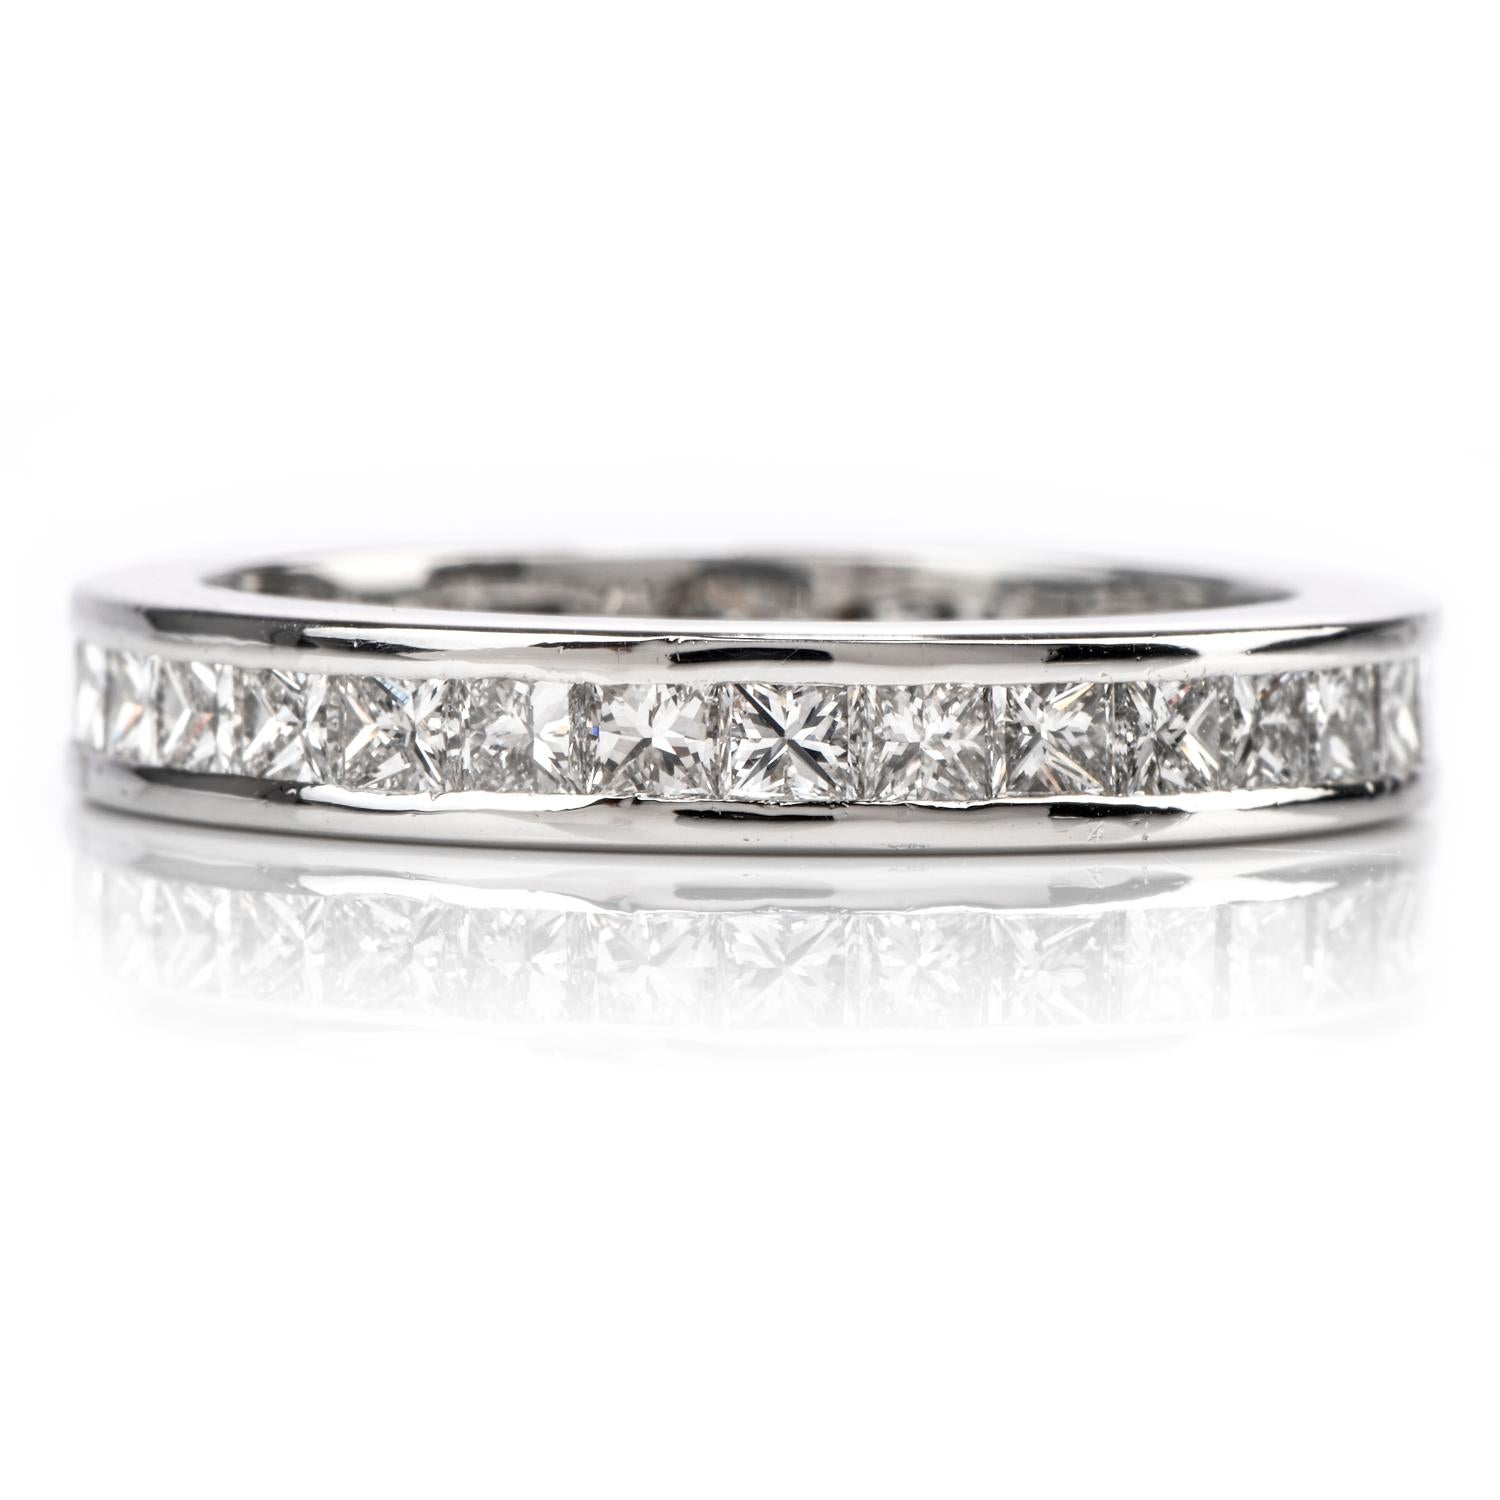 A wedding band ring with a contemporary update. Crafted in Platinum, this ring boasts of fire and brilliance  as the light hits any of the 31 princess cut channel set diamonds.

Diamonds weigh appx. 1.66 carats and are 

graded as H-I color and